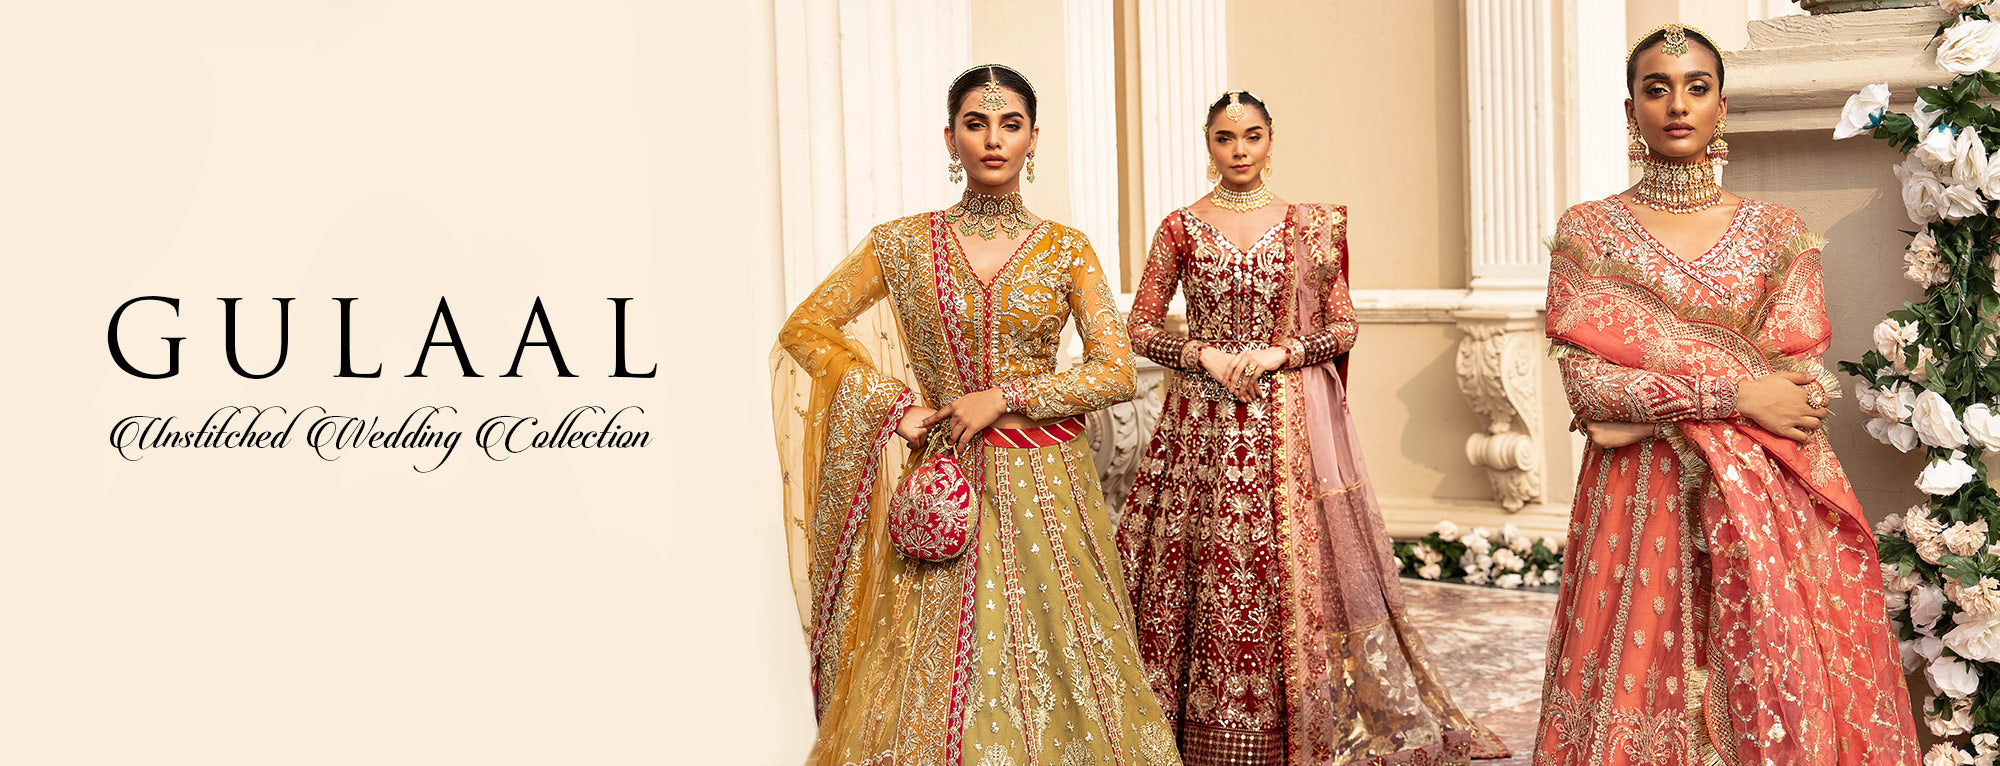 Unsitched Wedding Collection by Gulaal